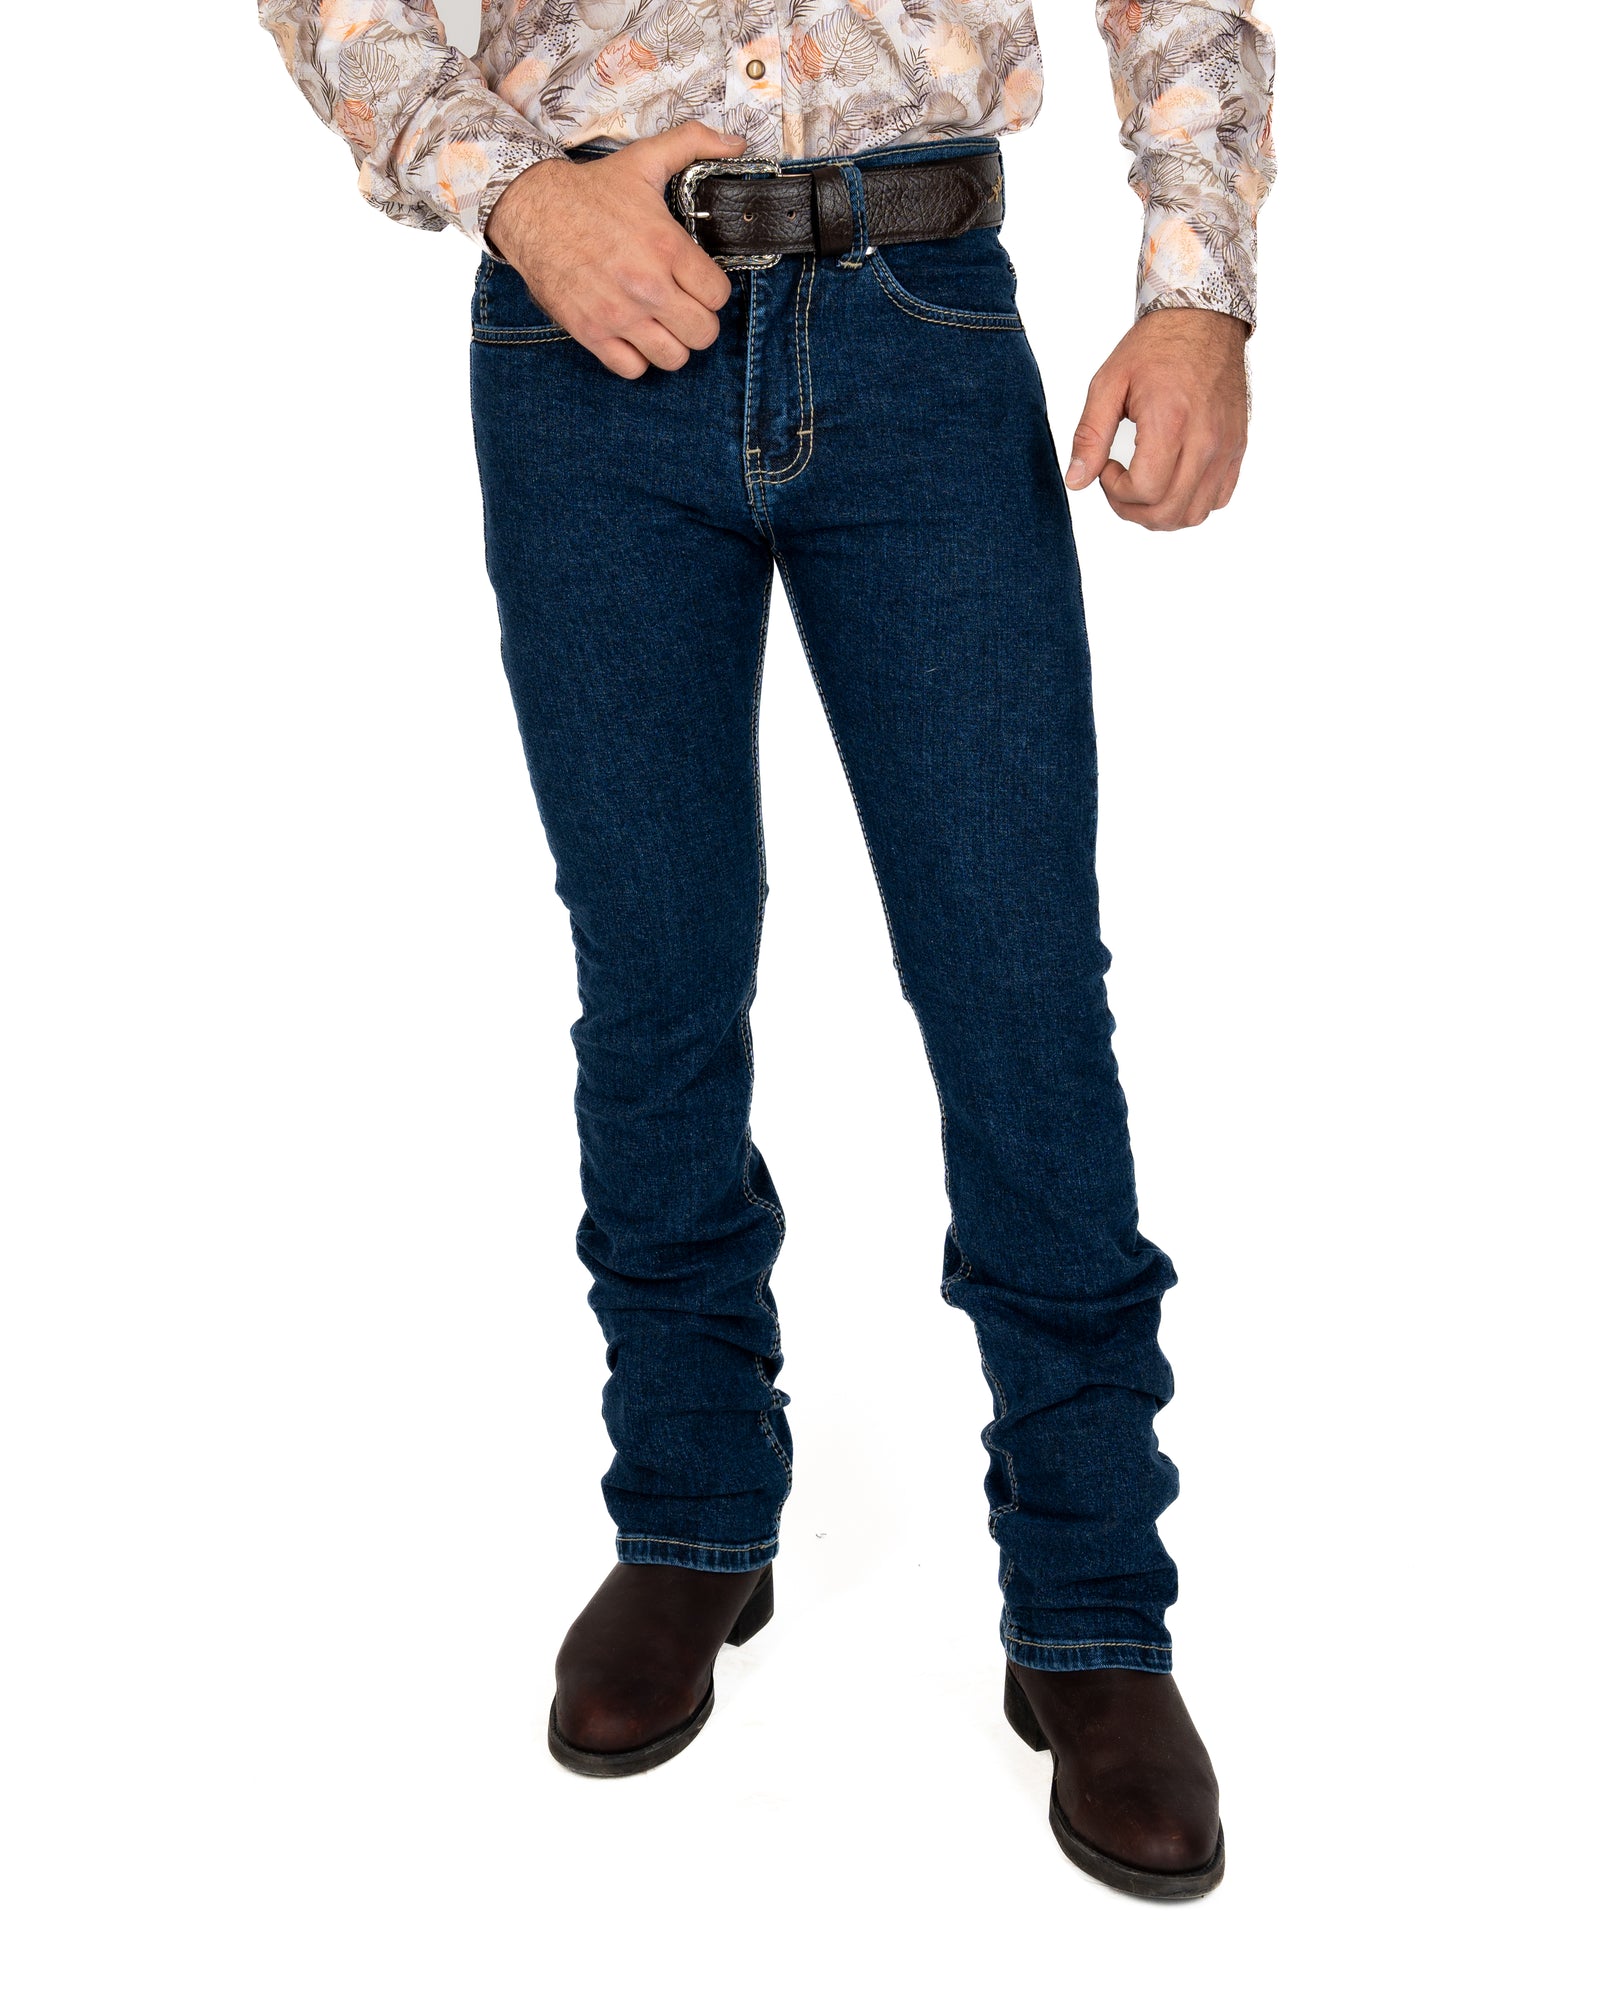 Jeans Rodeo West CB303 Caballero